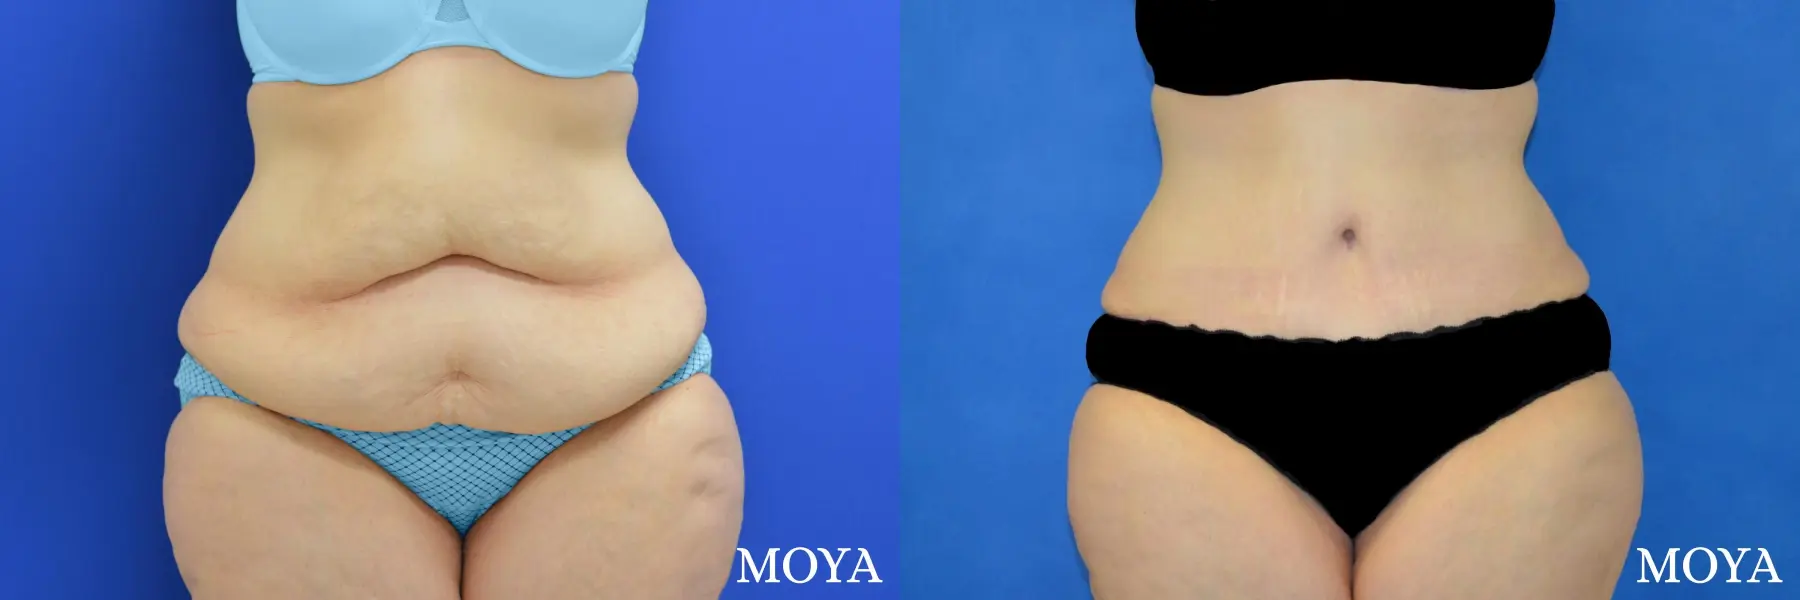 Tummy Tuck (standard) - Before and After 1